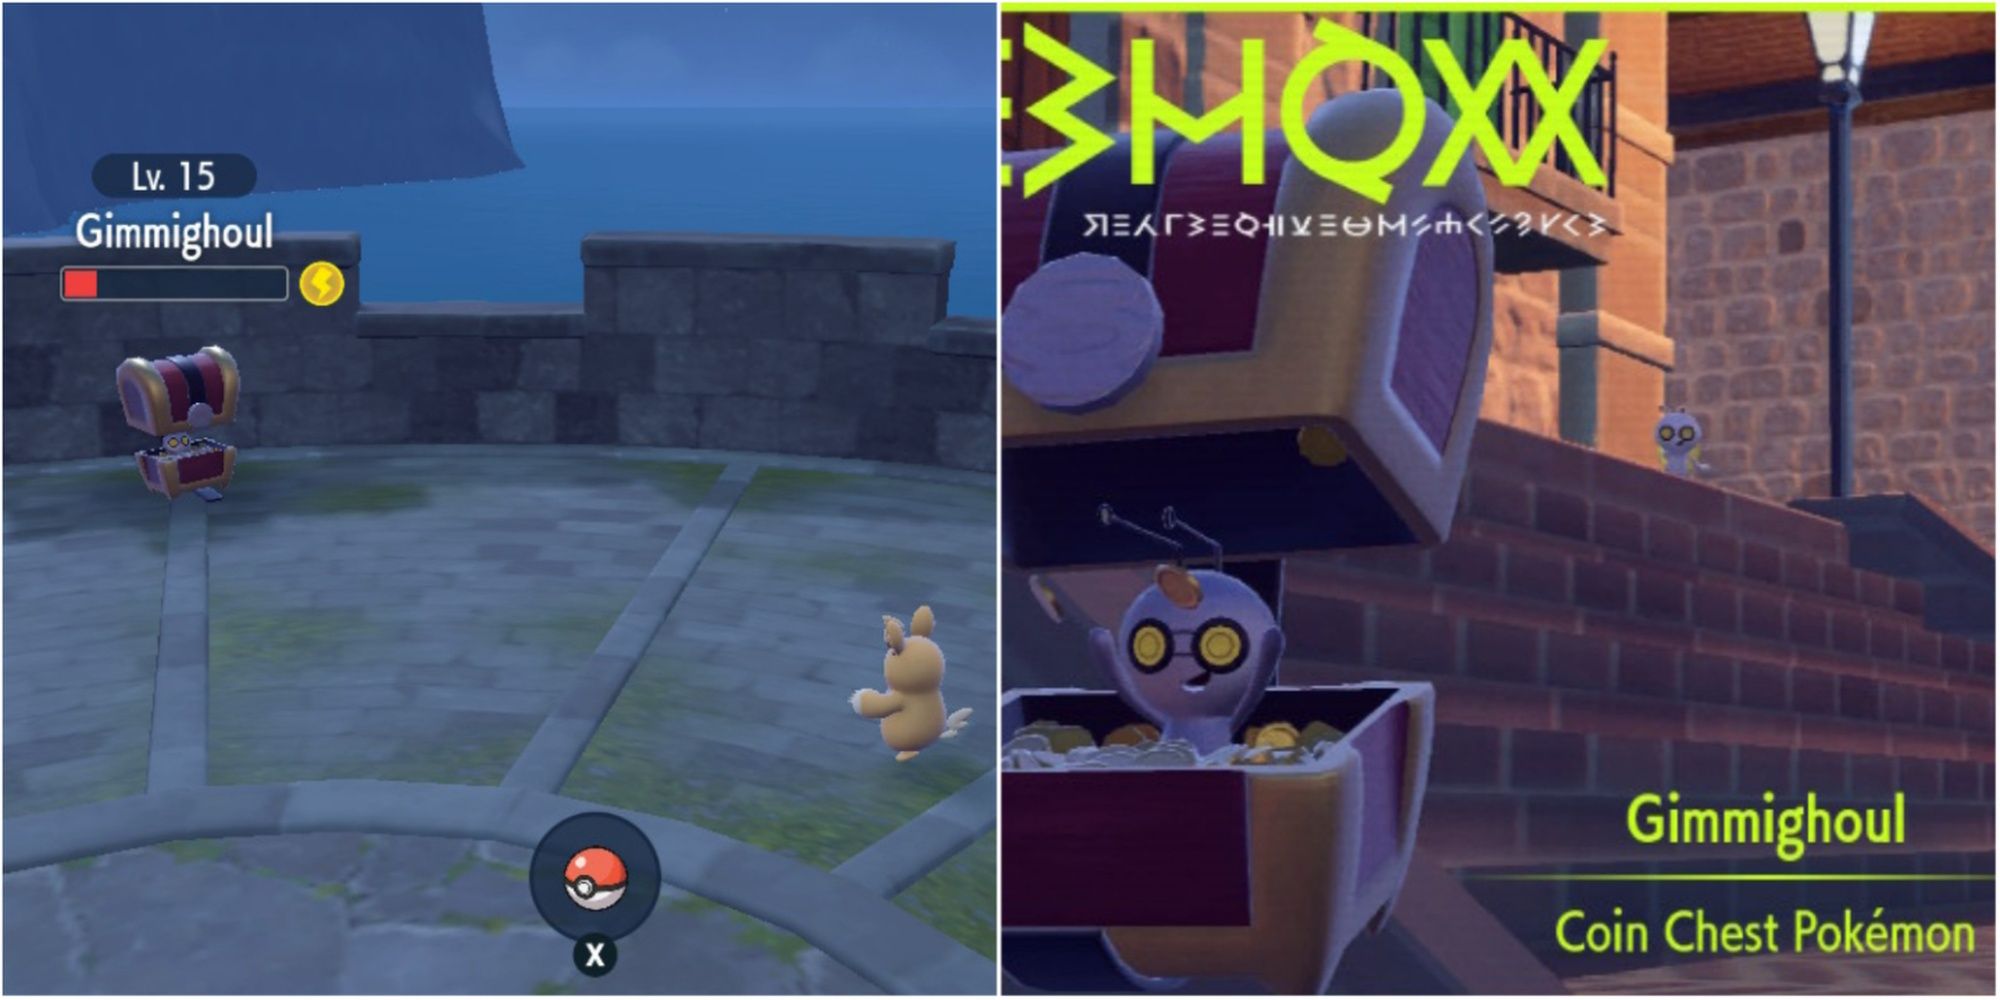 Trainer battles Gimmighoul and Gimmighoul pokedex entry